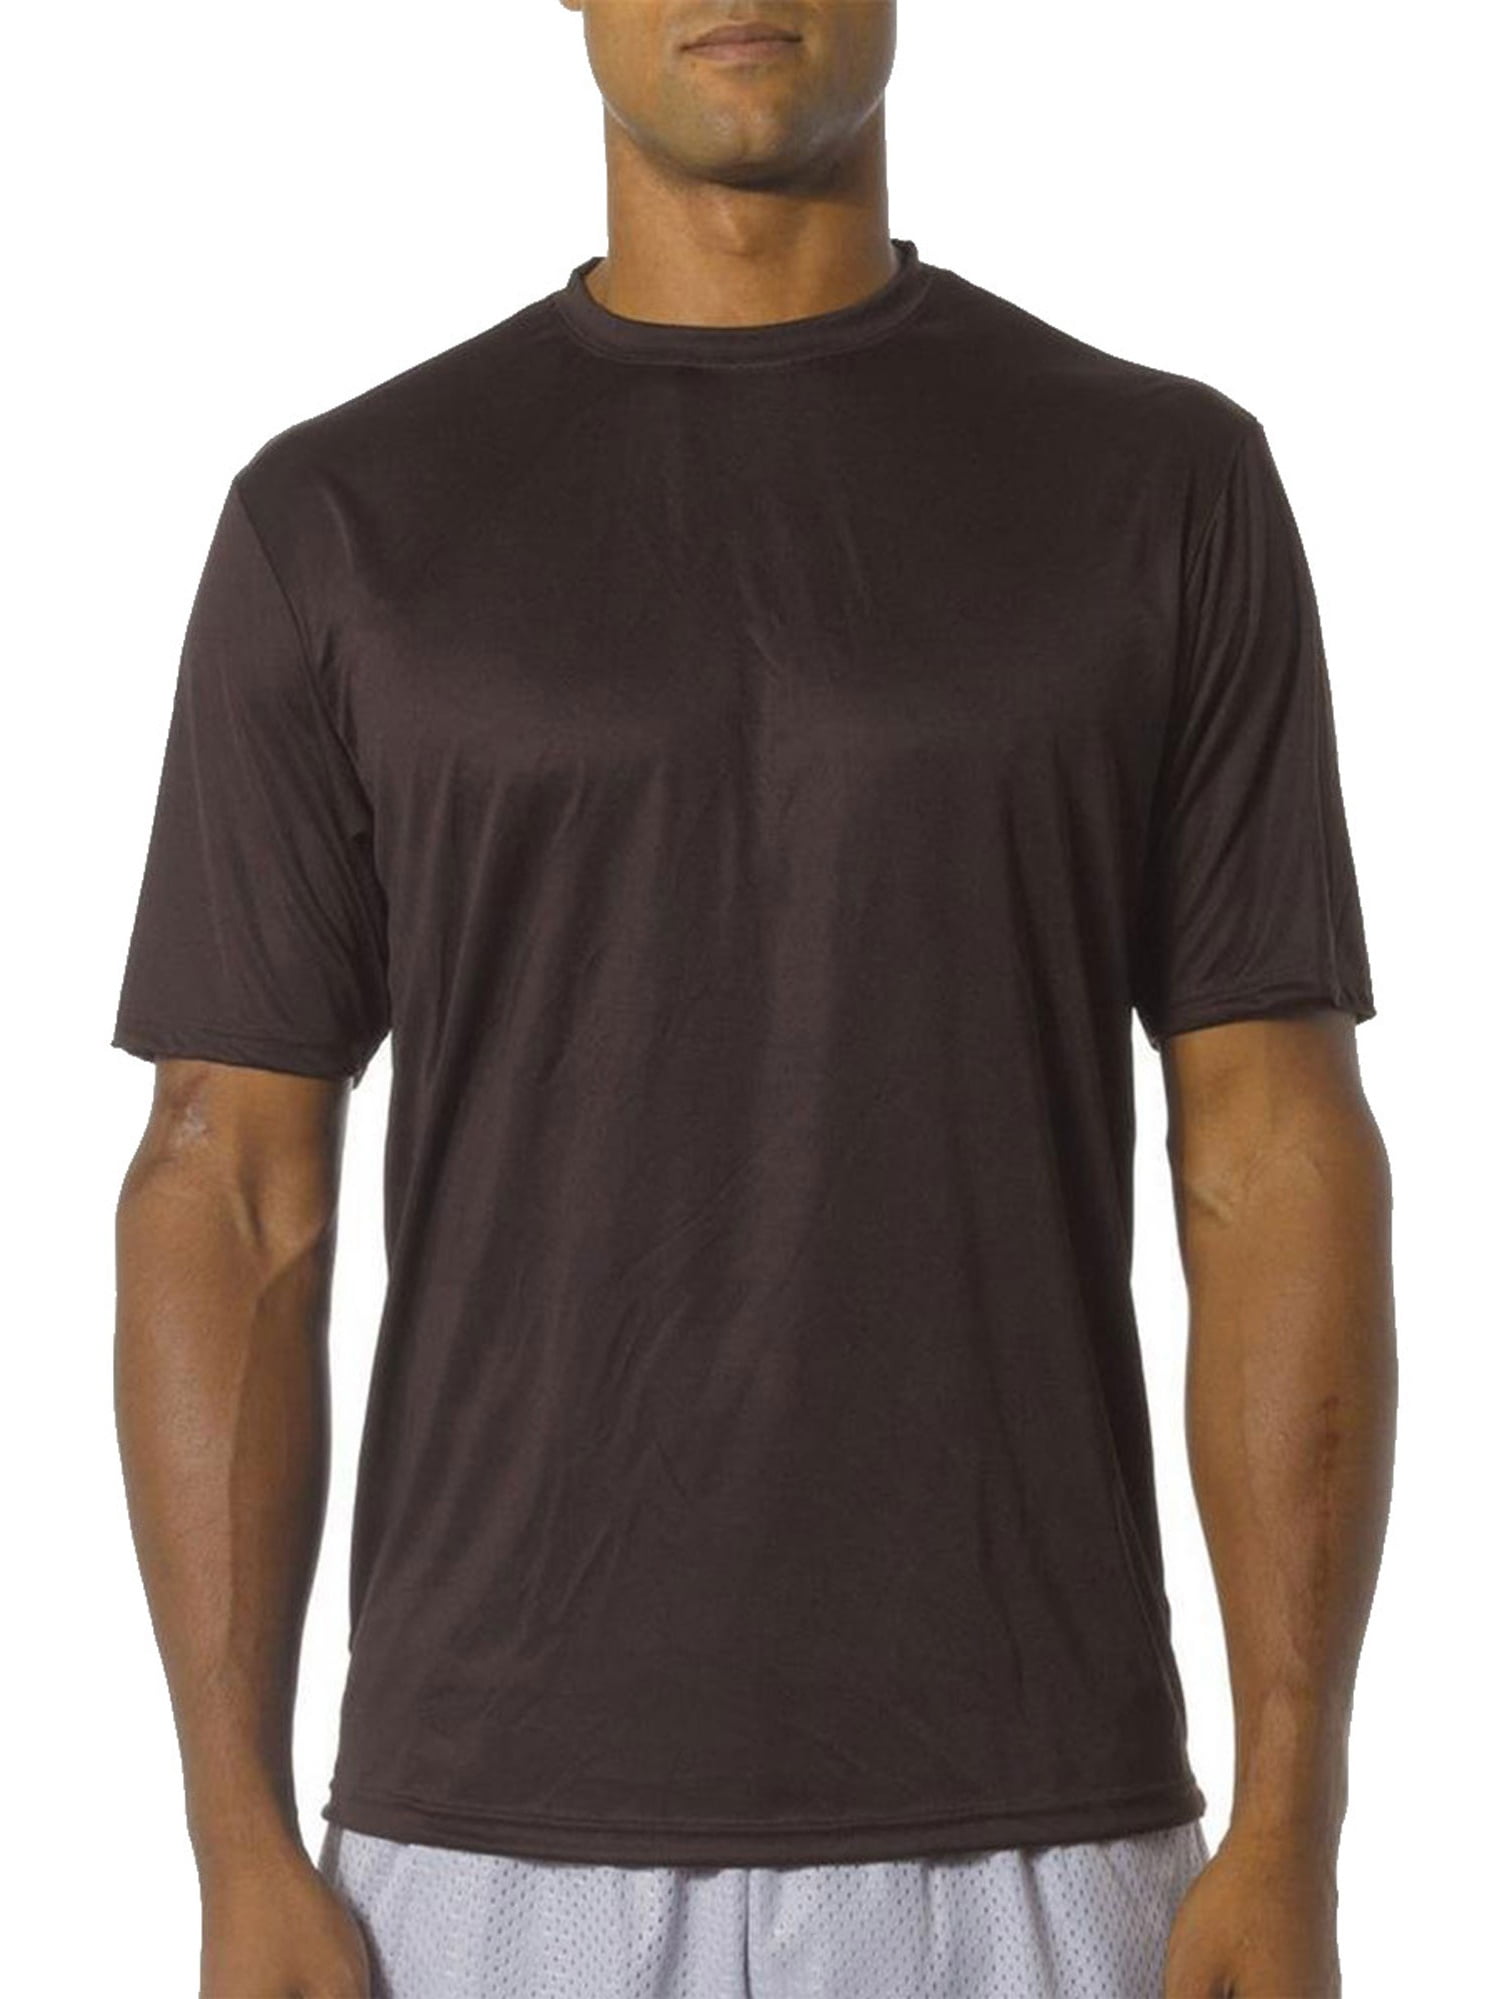 A4 Men's Combed Ring Spun Fitted Cotton T-Shirt - Walmart.com